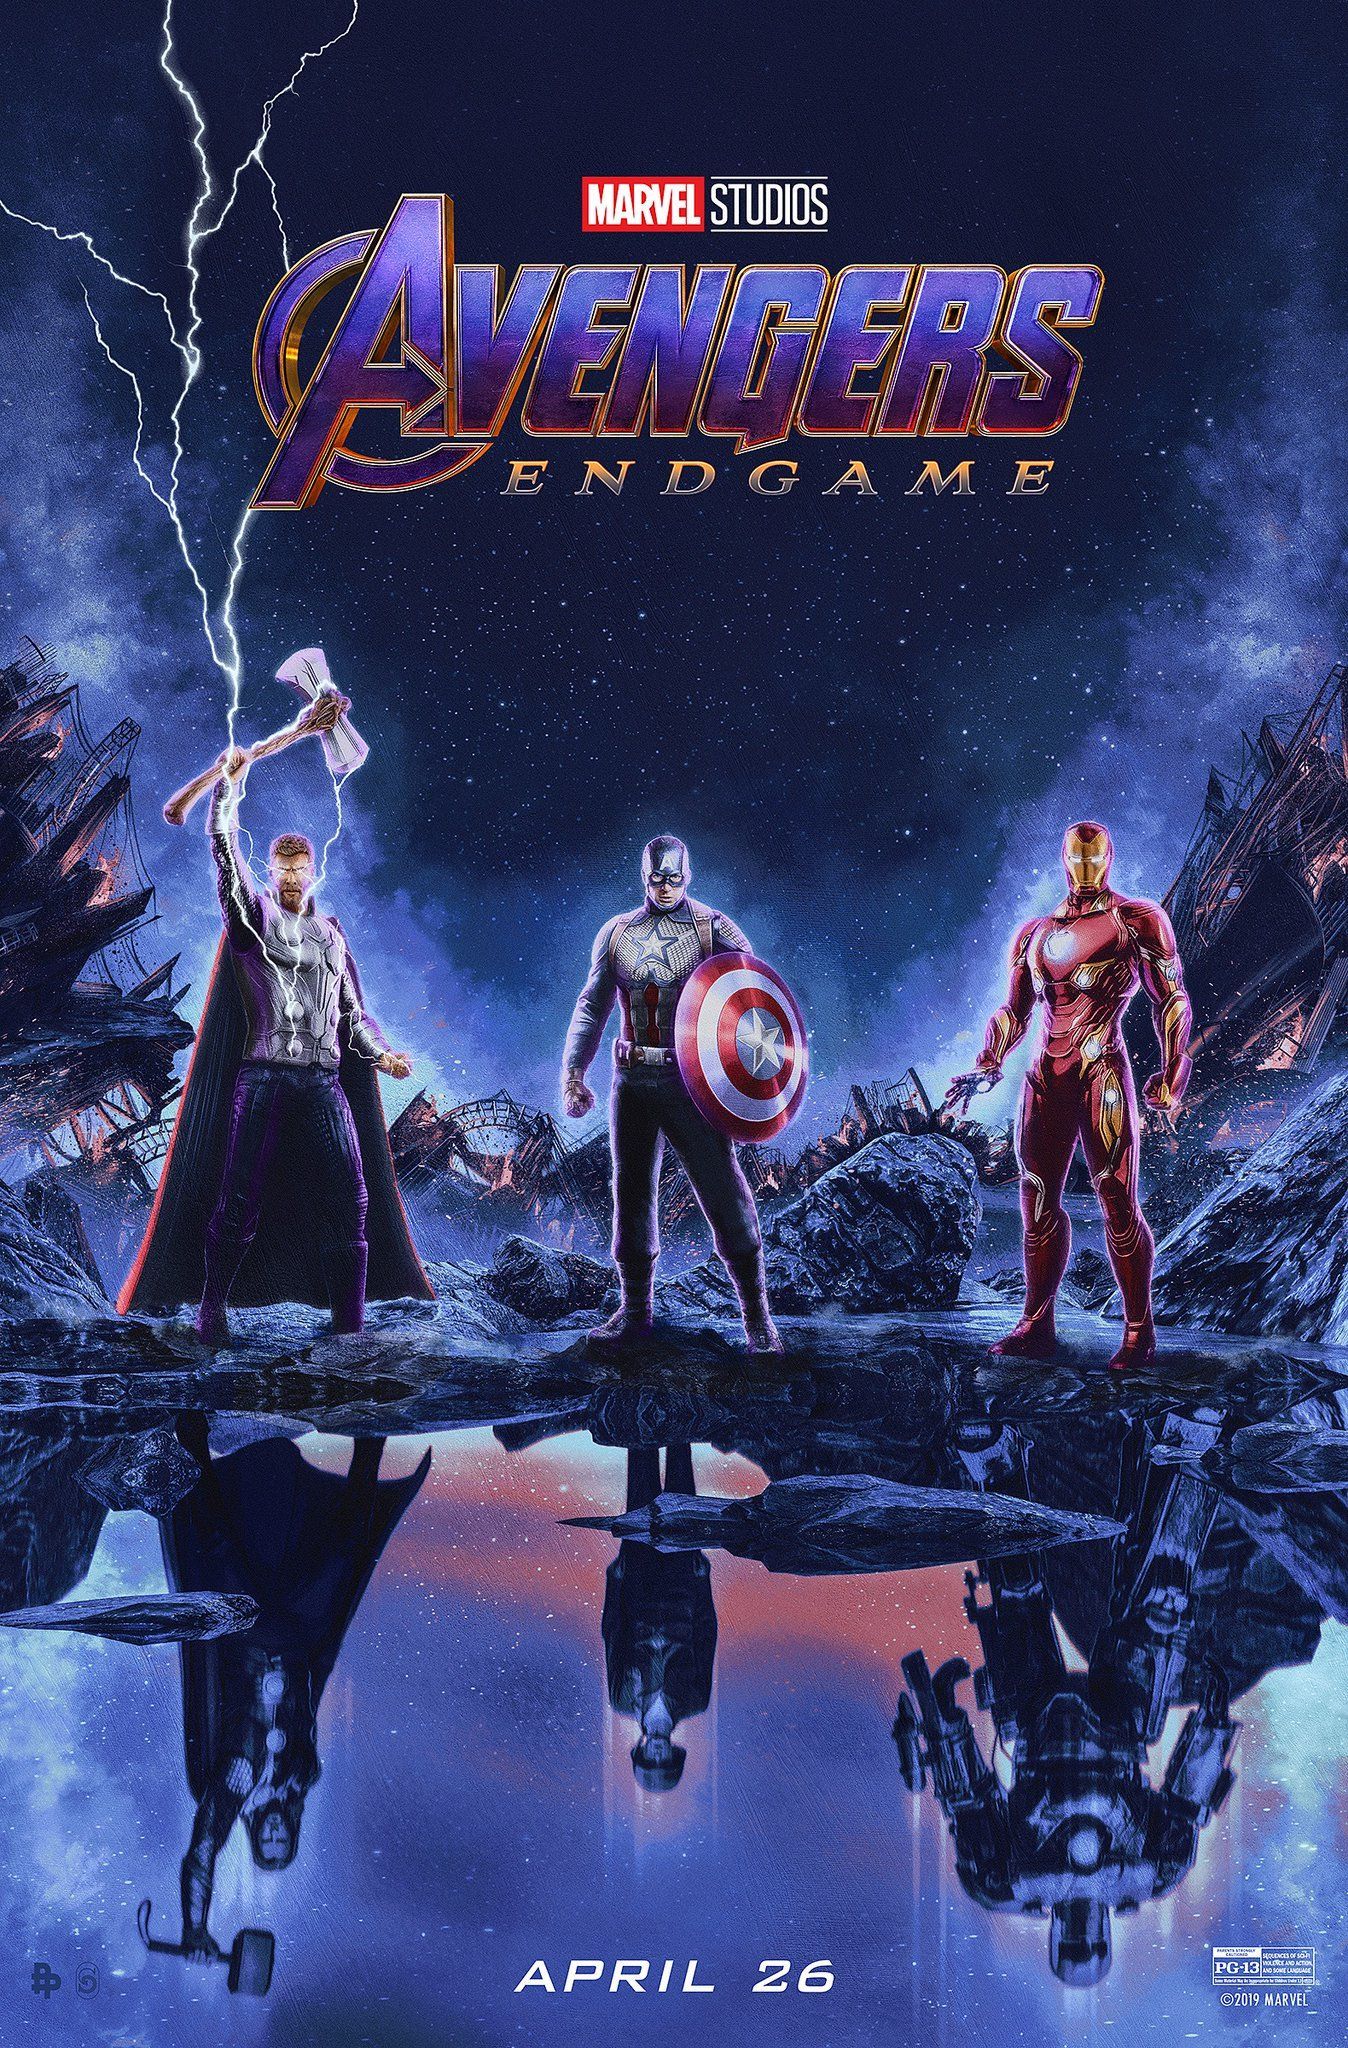 AVENGERS: ENDGAME New Poster Reflects On The Legacy Of